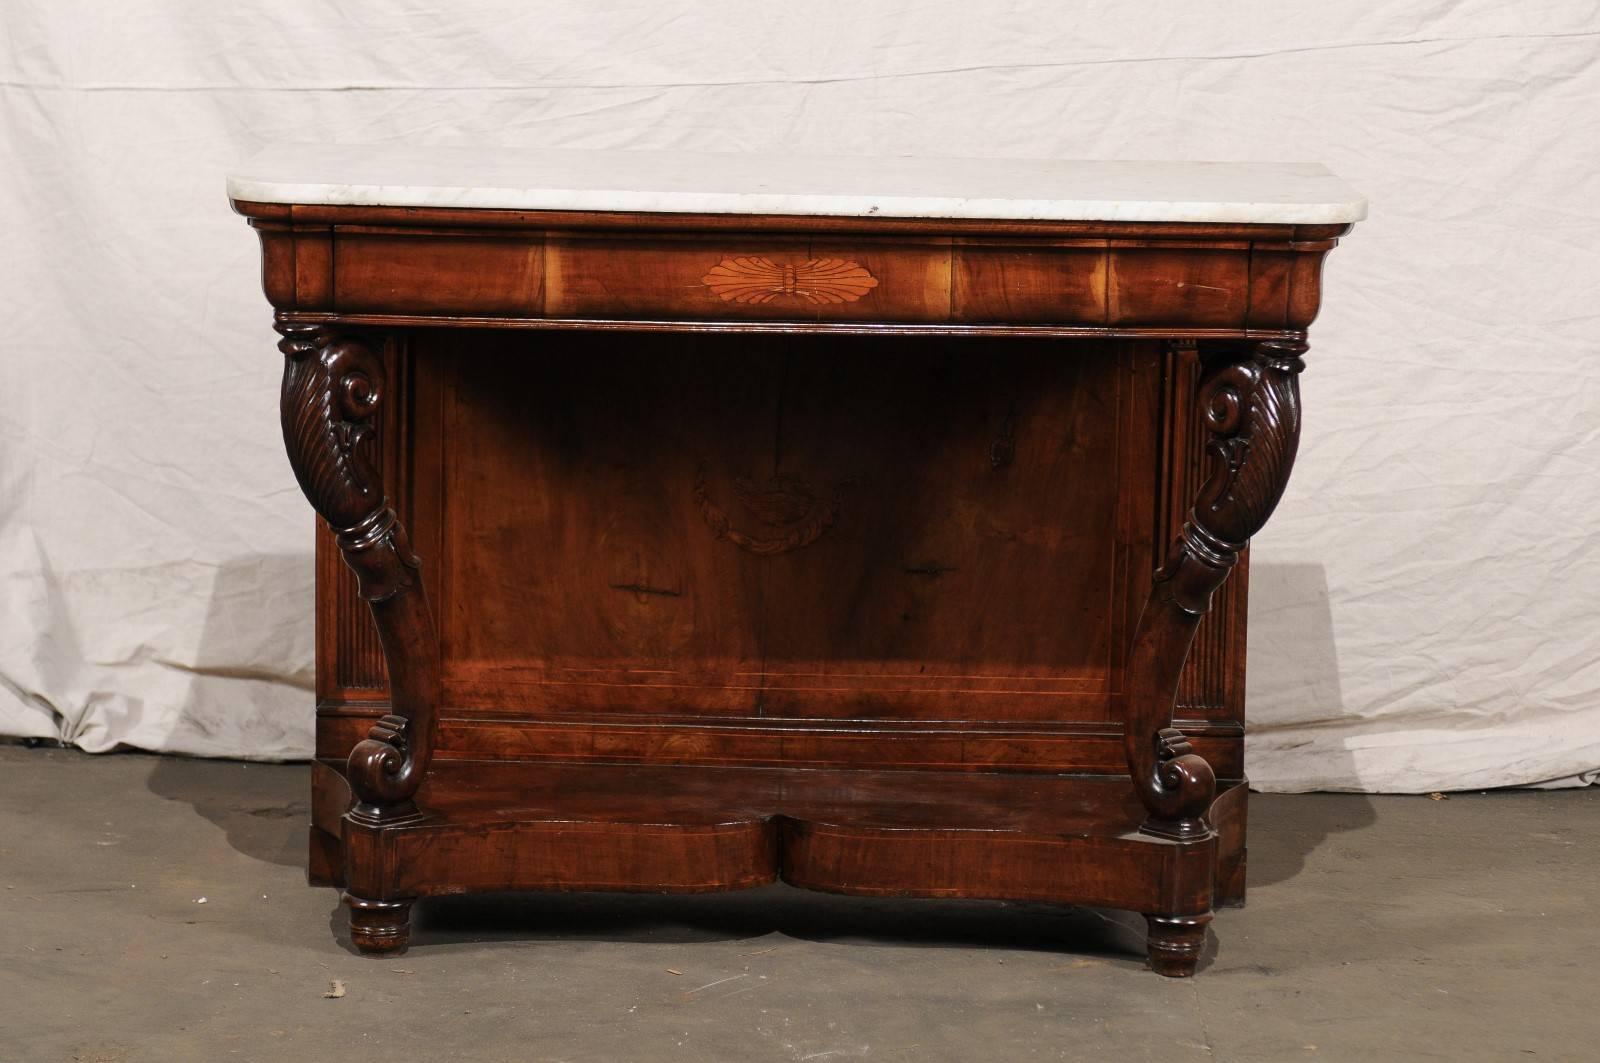 Italian 19th century walnut console with marble top.